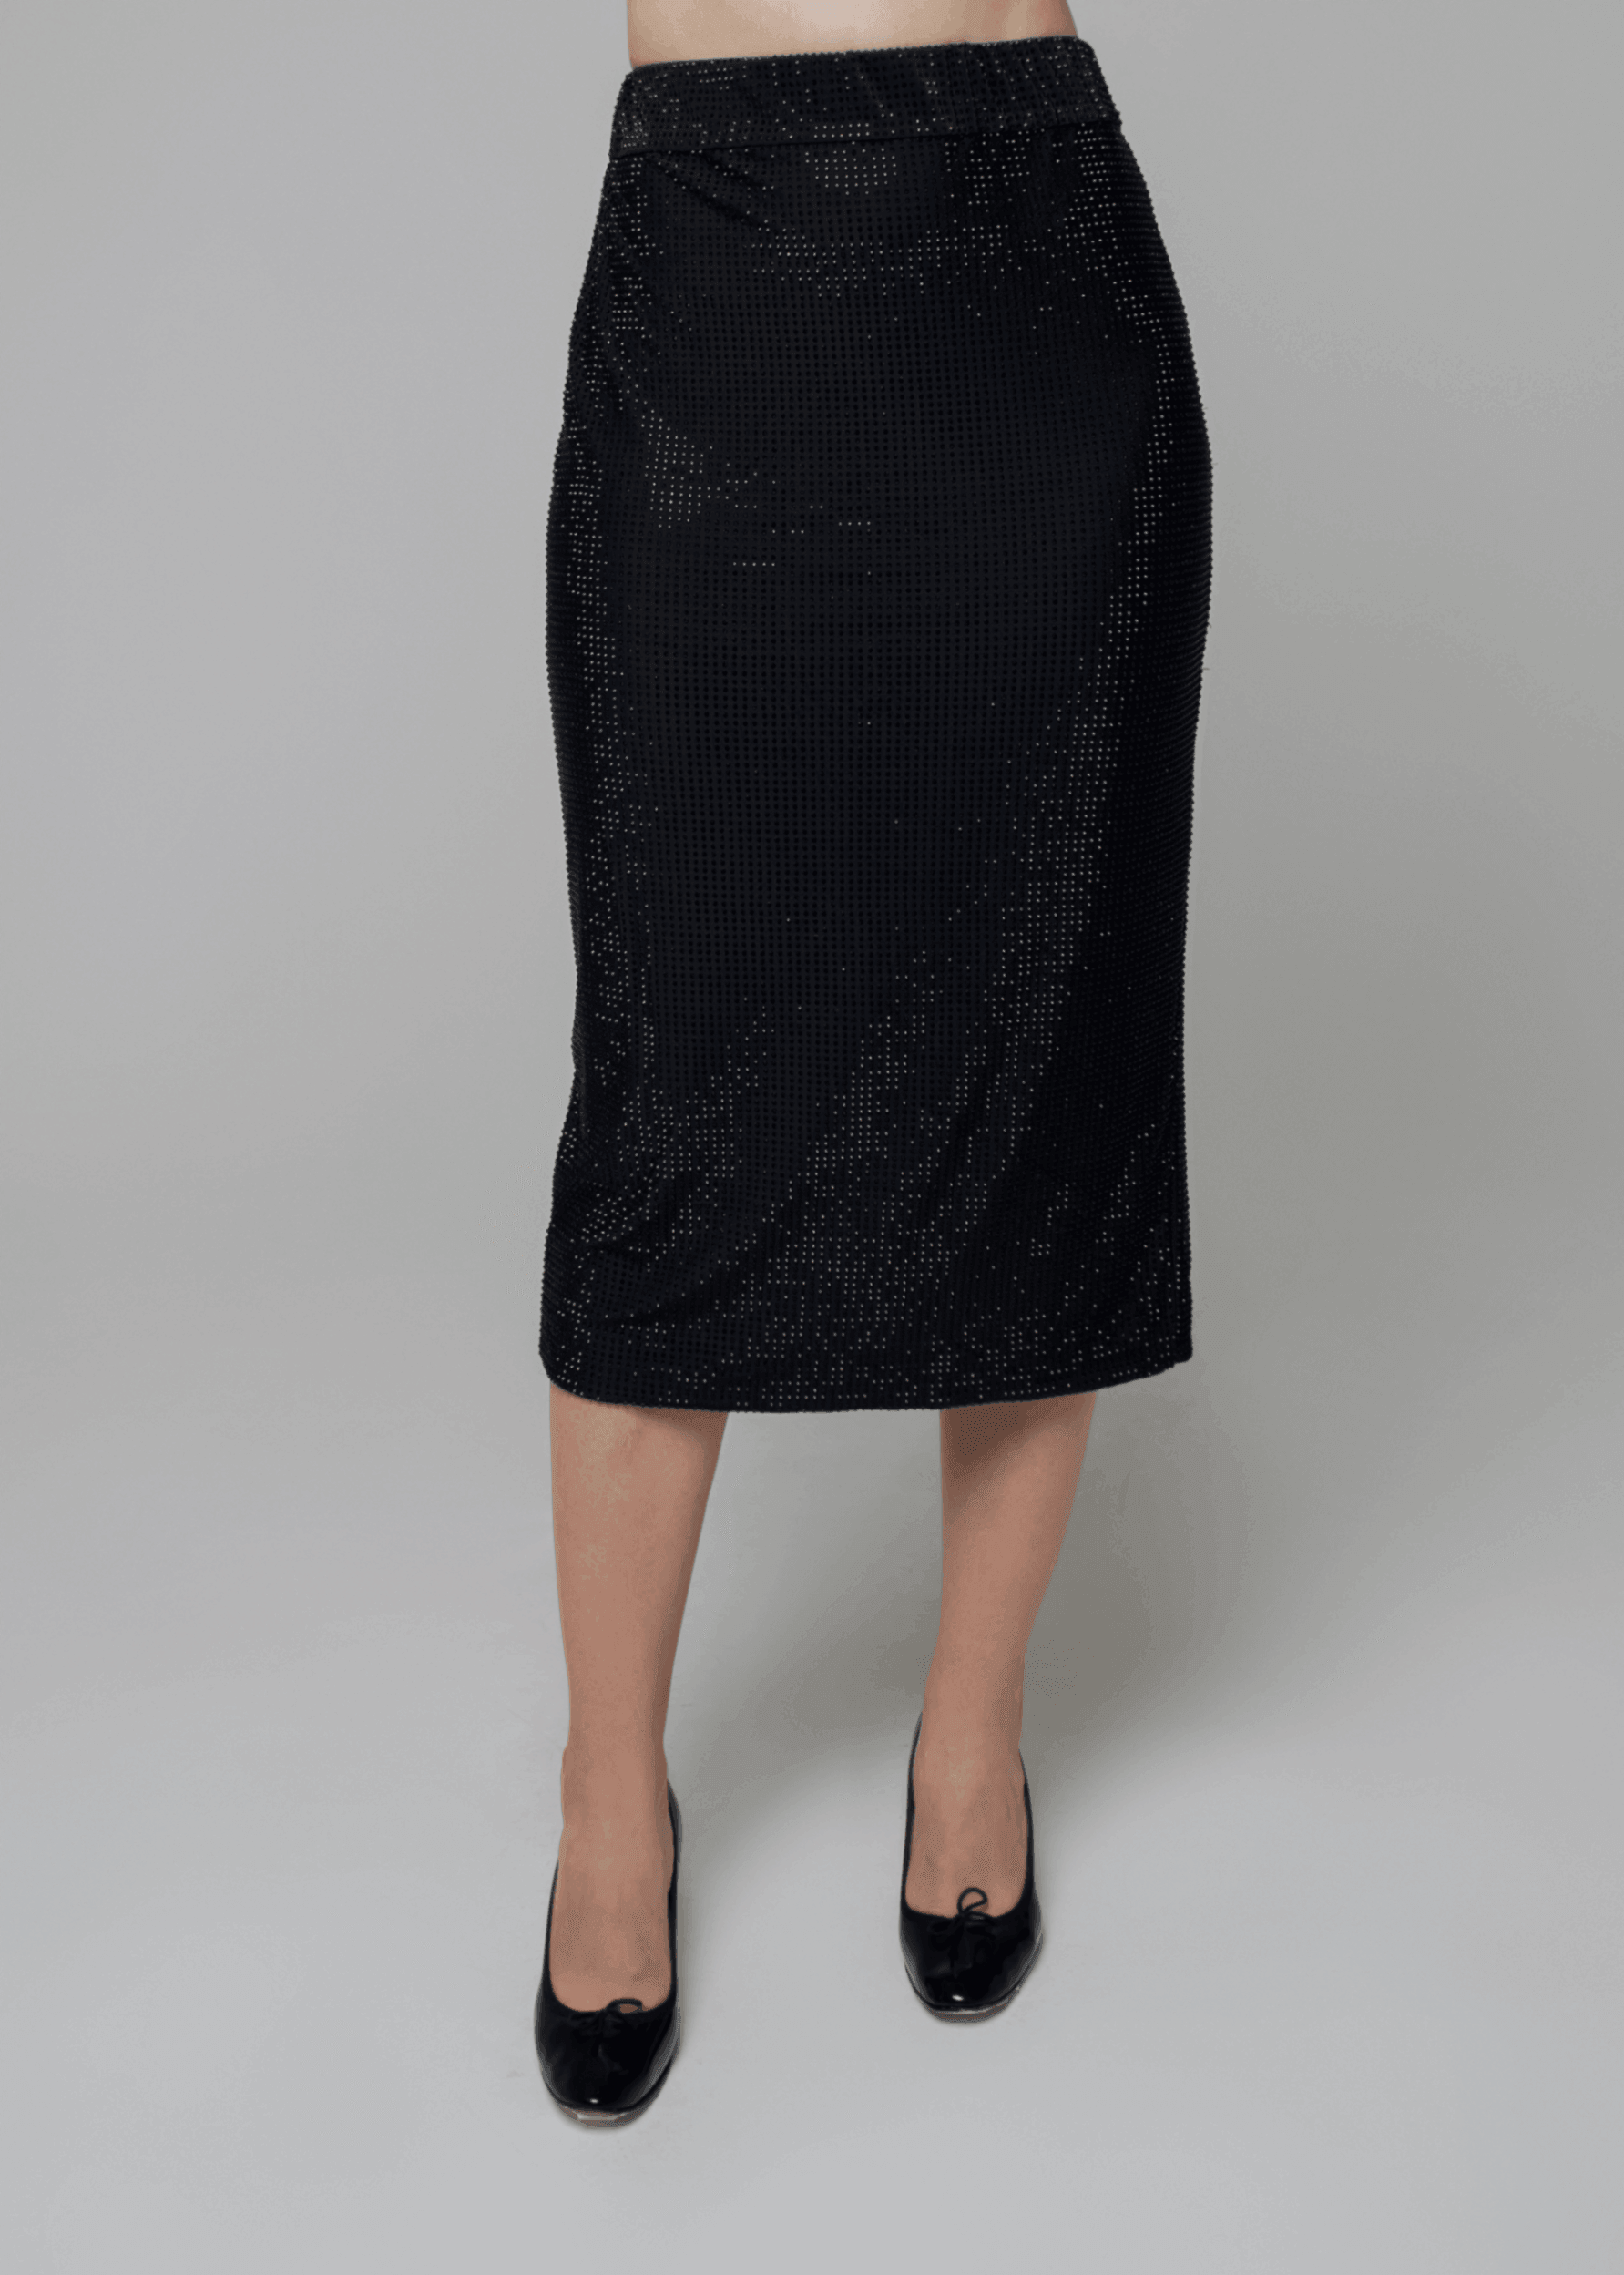 Exquisite detail of Axinia Crystal Pencil Skirt showcasing the fine craftsmanship and elegant design characteristic of Axinia Collection 's luxury collection.